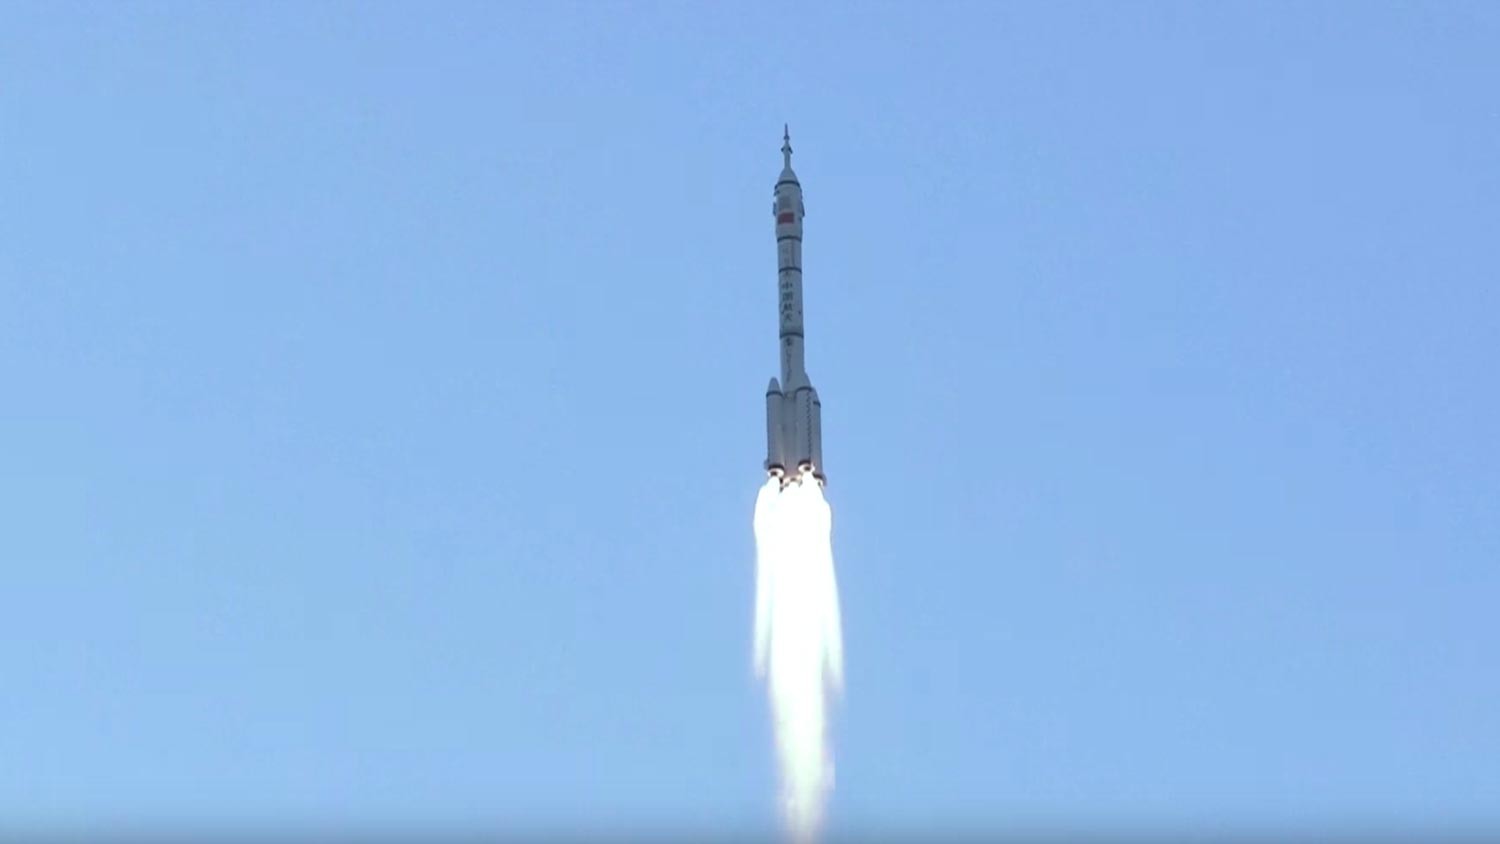 Кадр видео &ldquo;Launch of Manned China Mission with Shenzhou 11 to Tiangong-2&rdquo;. Скриншот &copy; L!FE